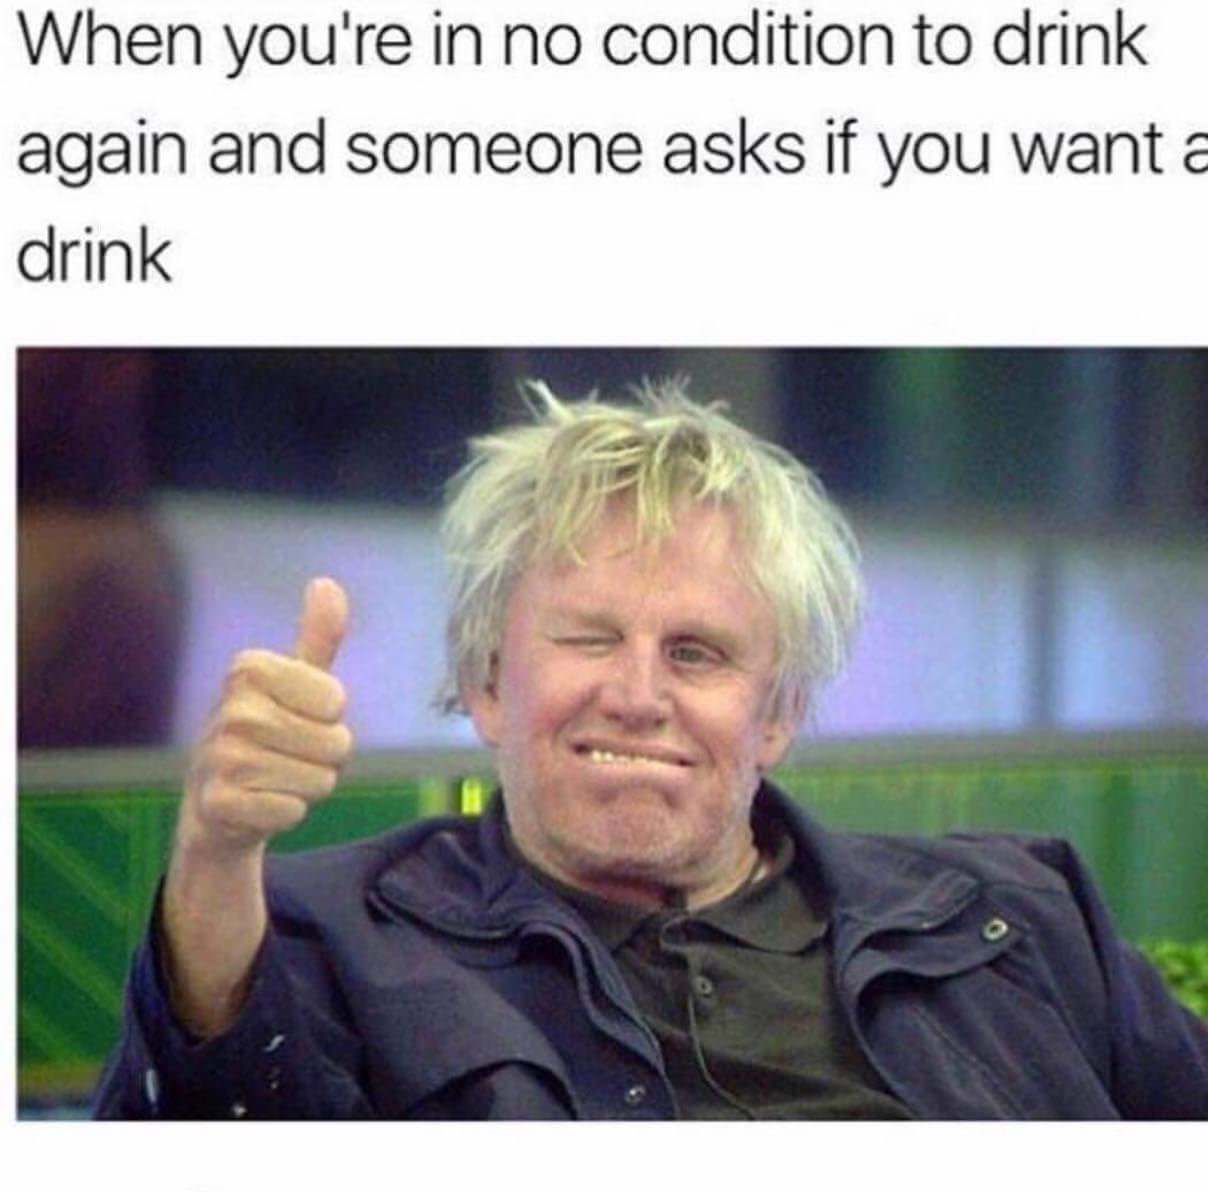 gary busey meme - When you're in no condition to drink again and someone asks if you want a drink